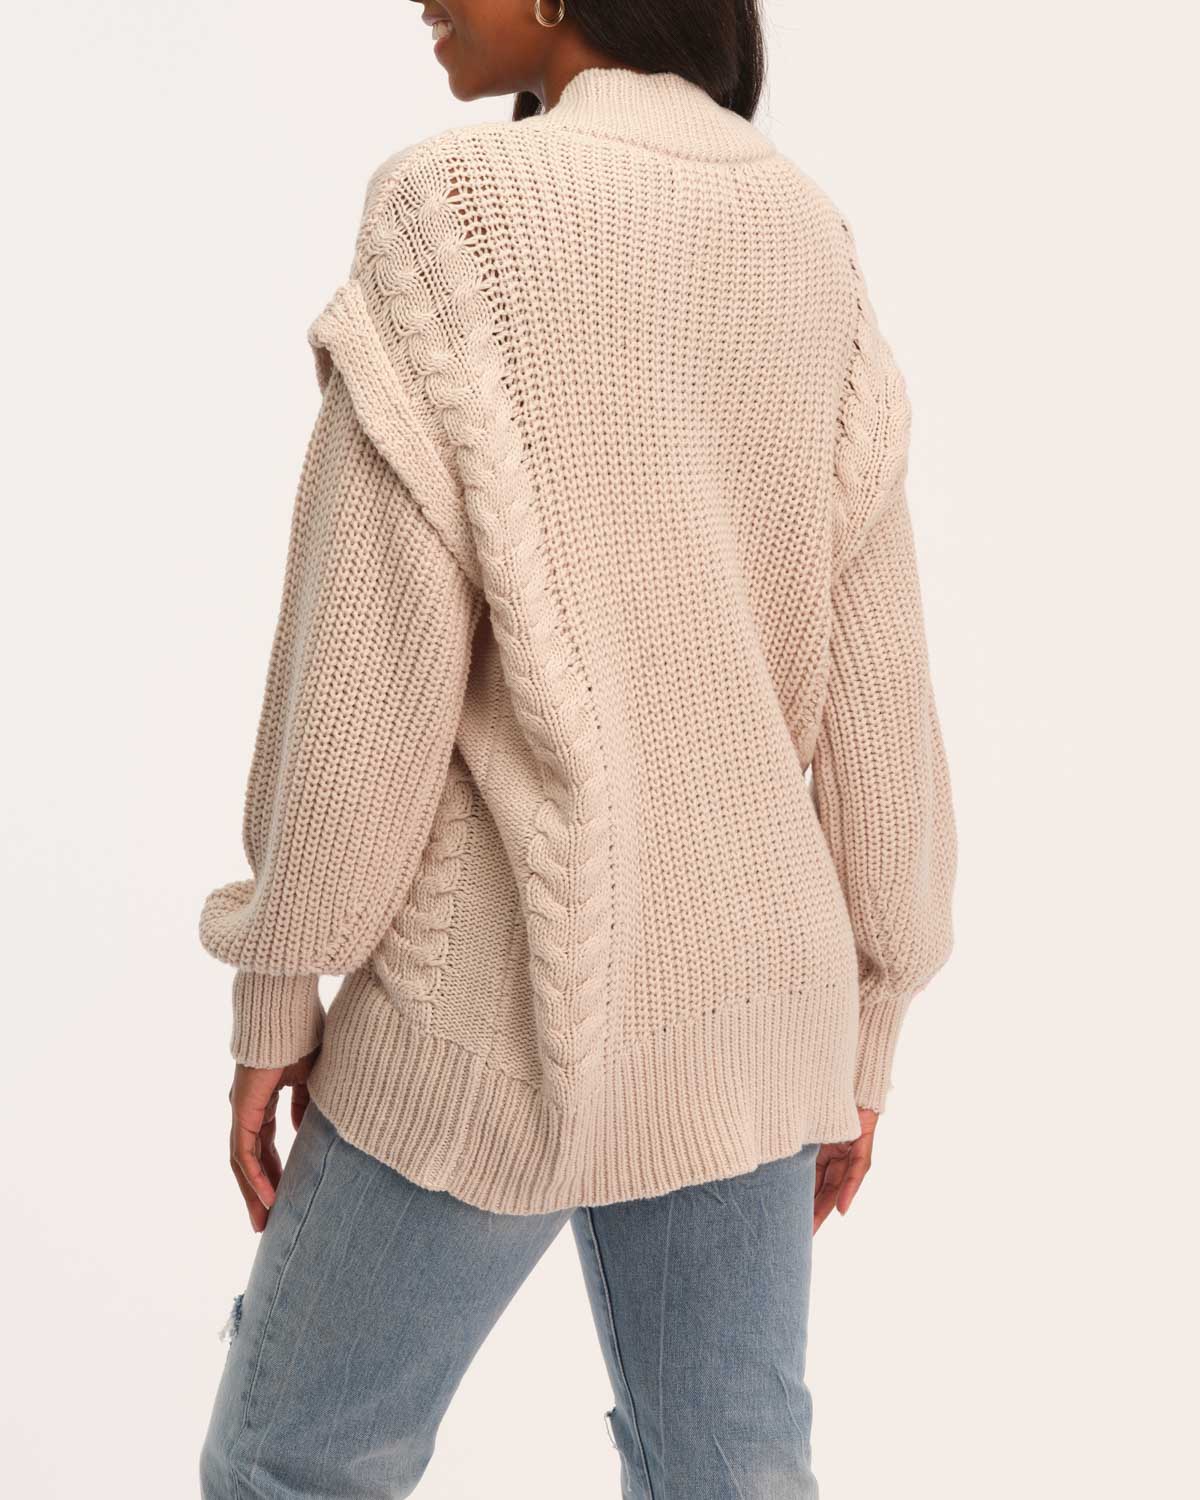 Shop For The Republic Women's V-Neck Cable Knit Cardigan | JANE + MERCER